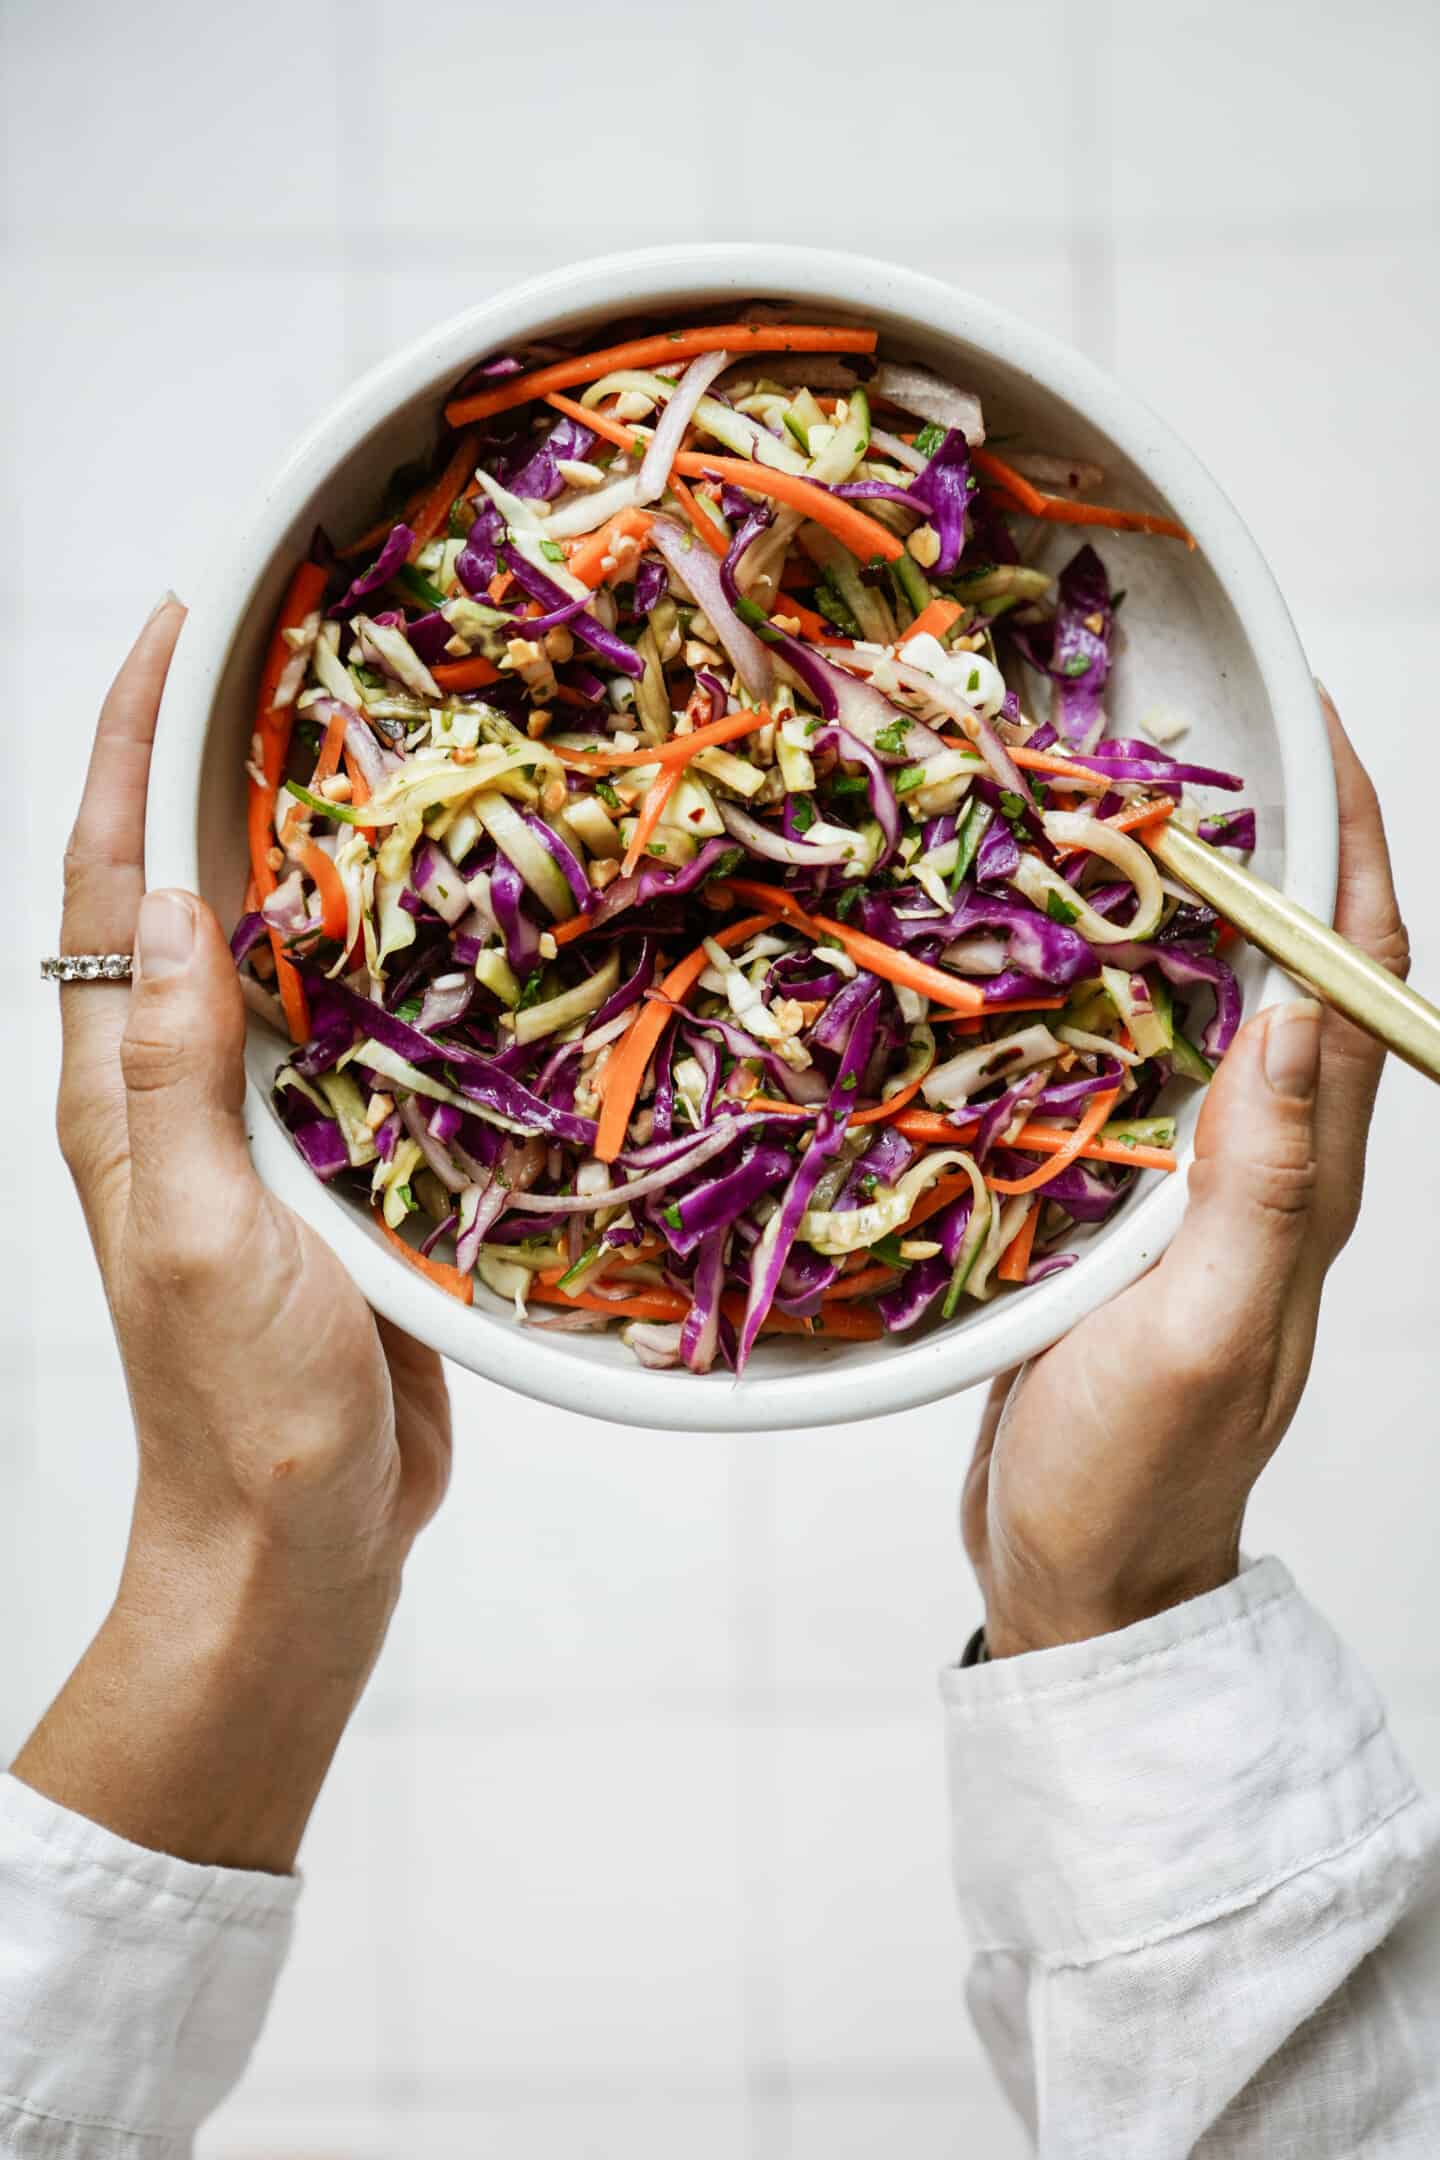 Mixed cabbage salad in a bowl